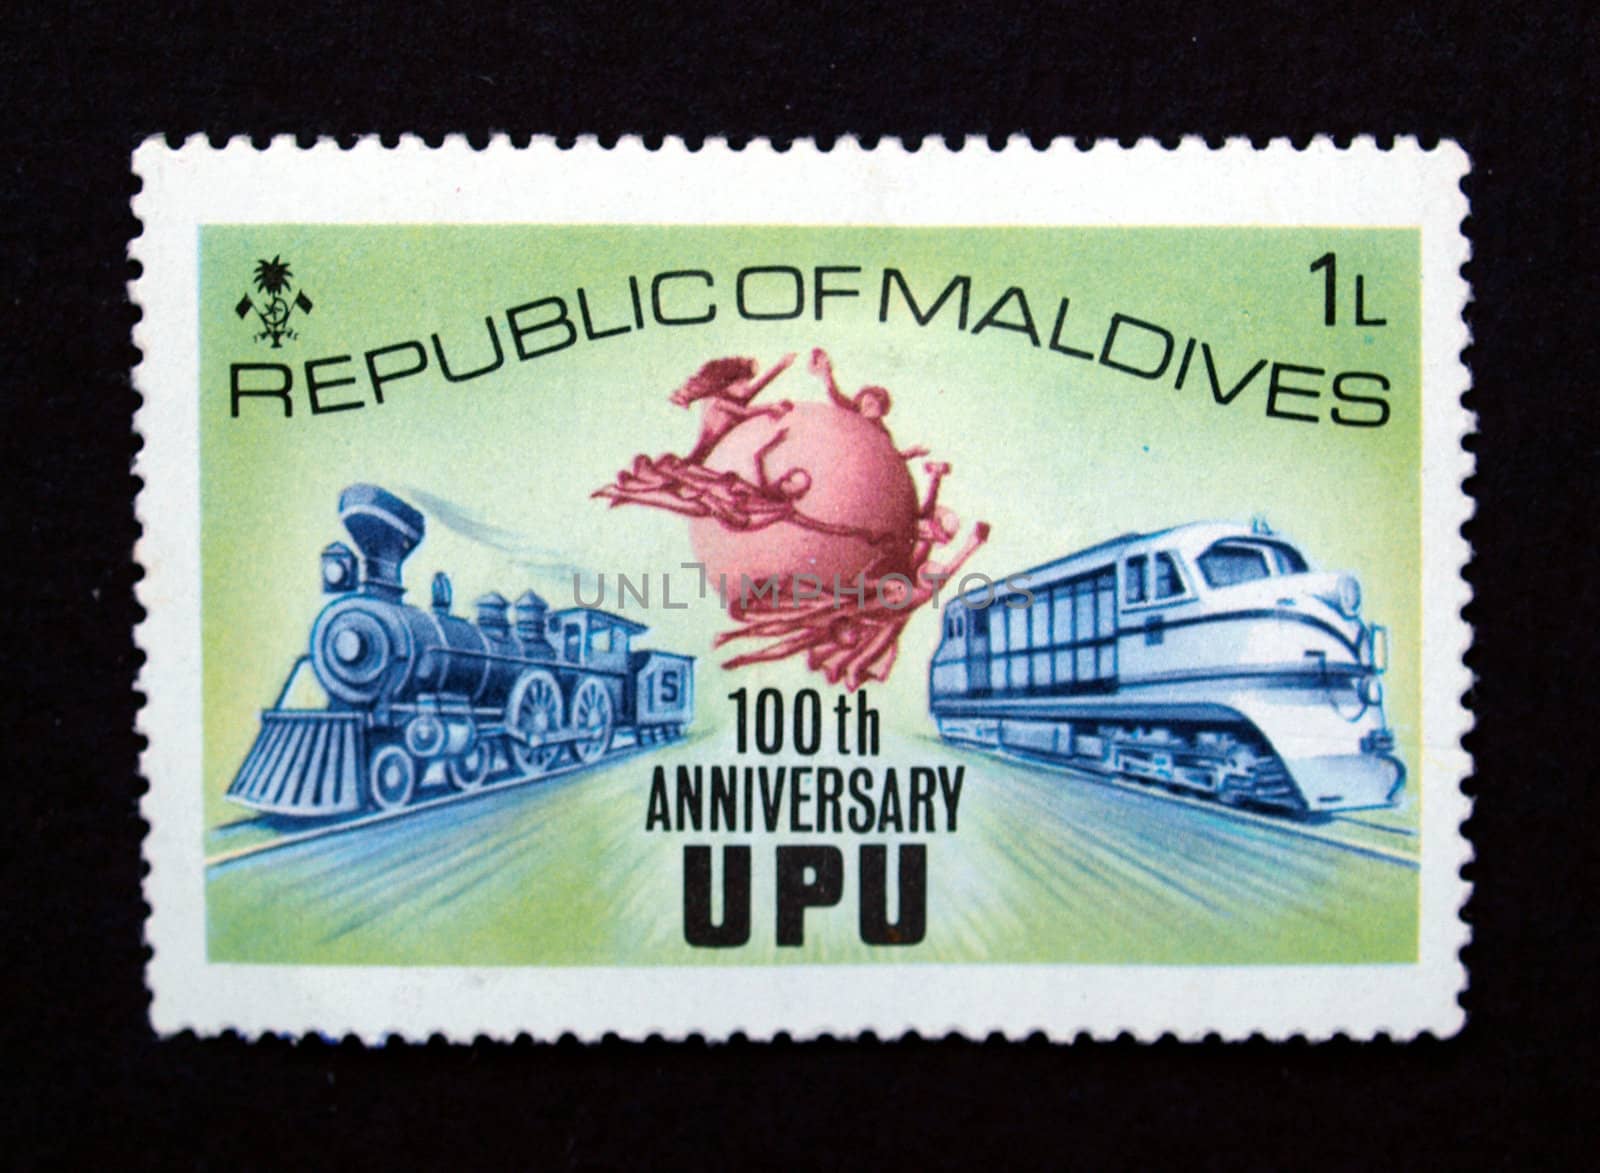 Maldives stamp with train on black